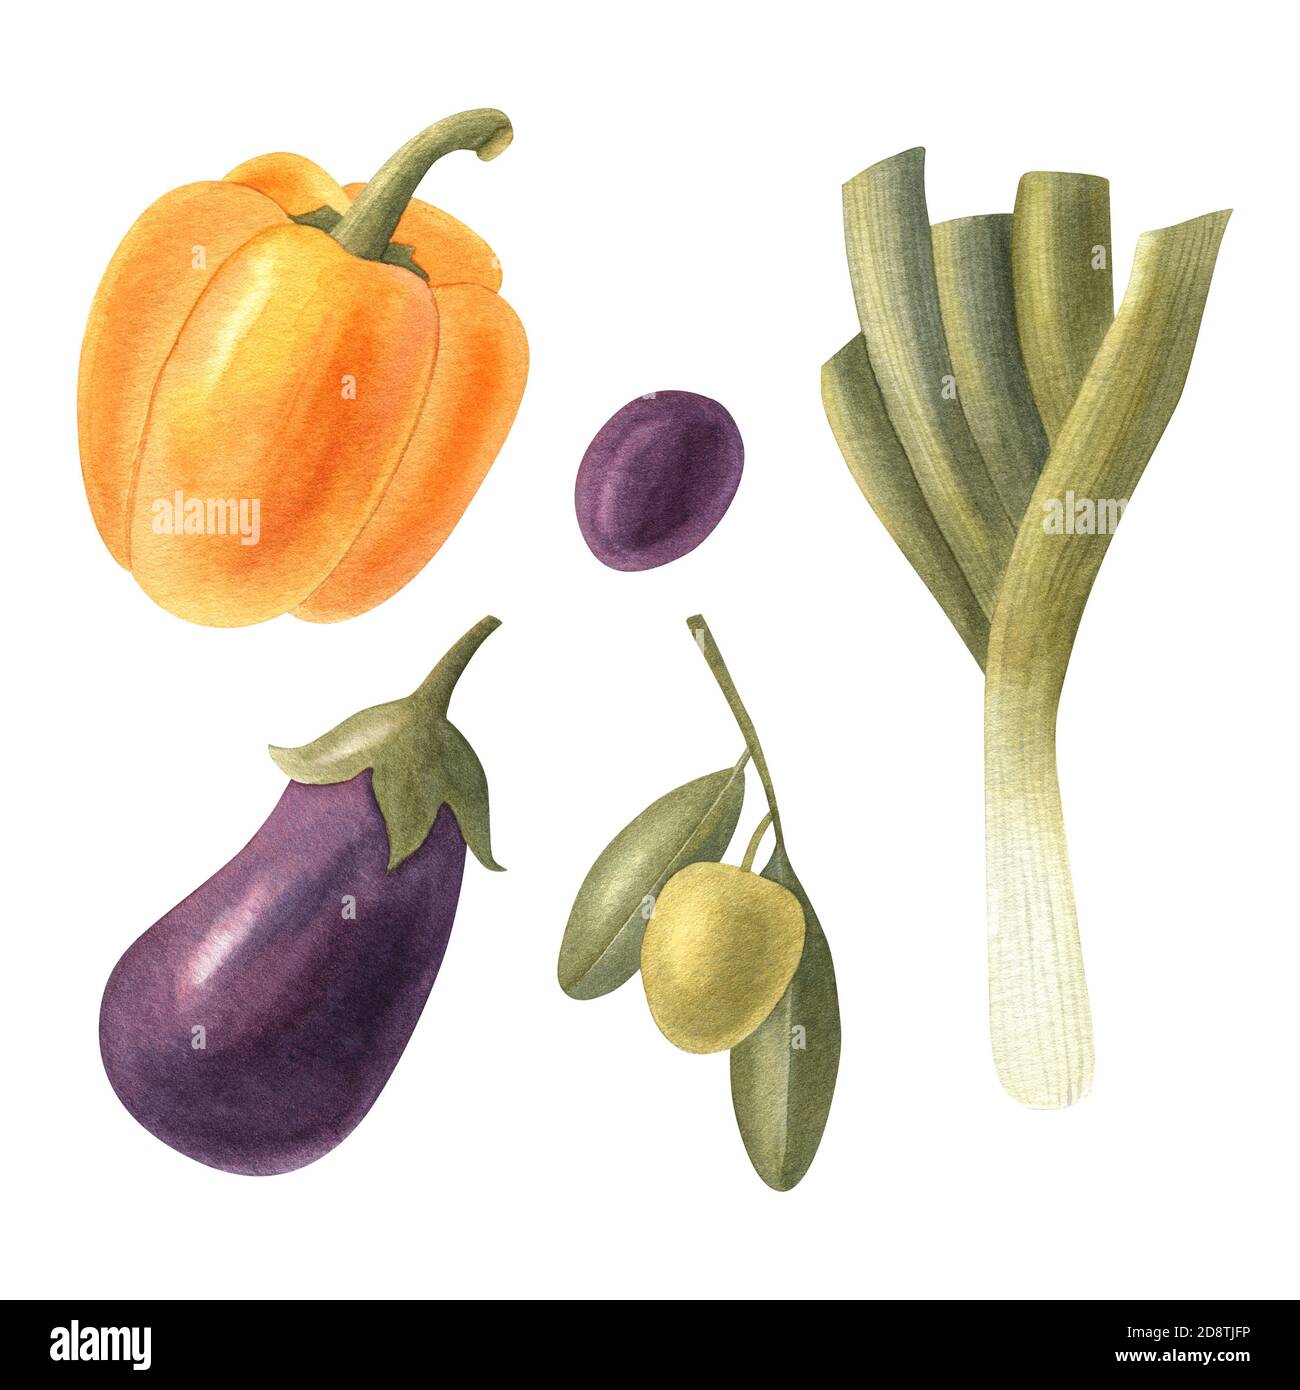 Watercolor set of fresh vegetables: eggplant, leek, bell pepper, olive, and olive branch. Bright isolated illustration on the white background. Stock Photo